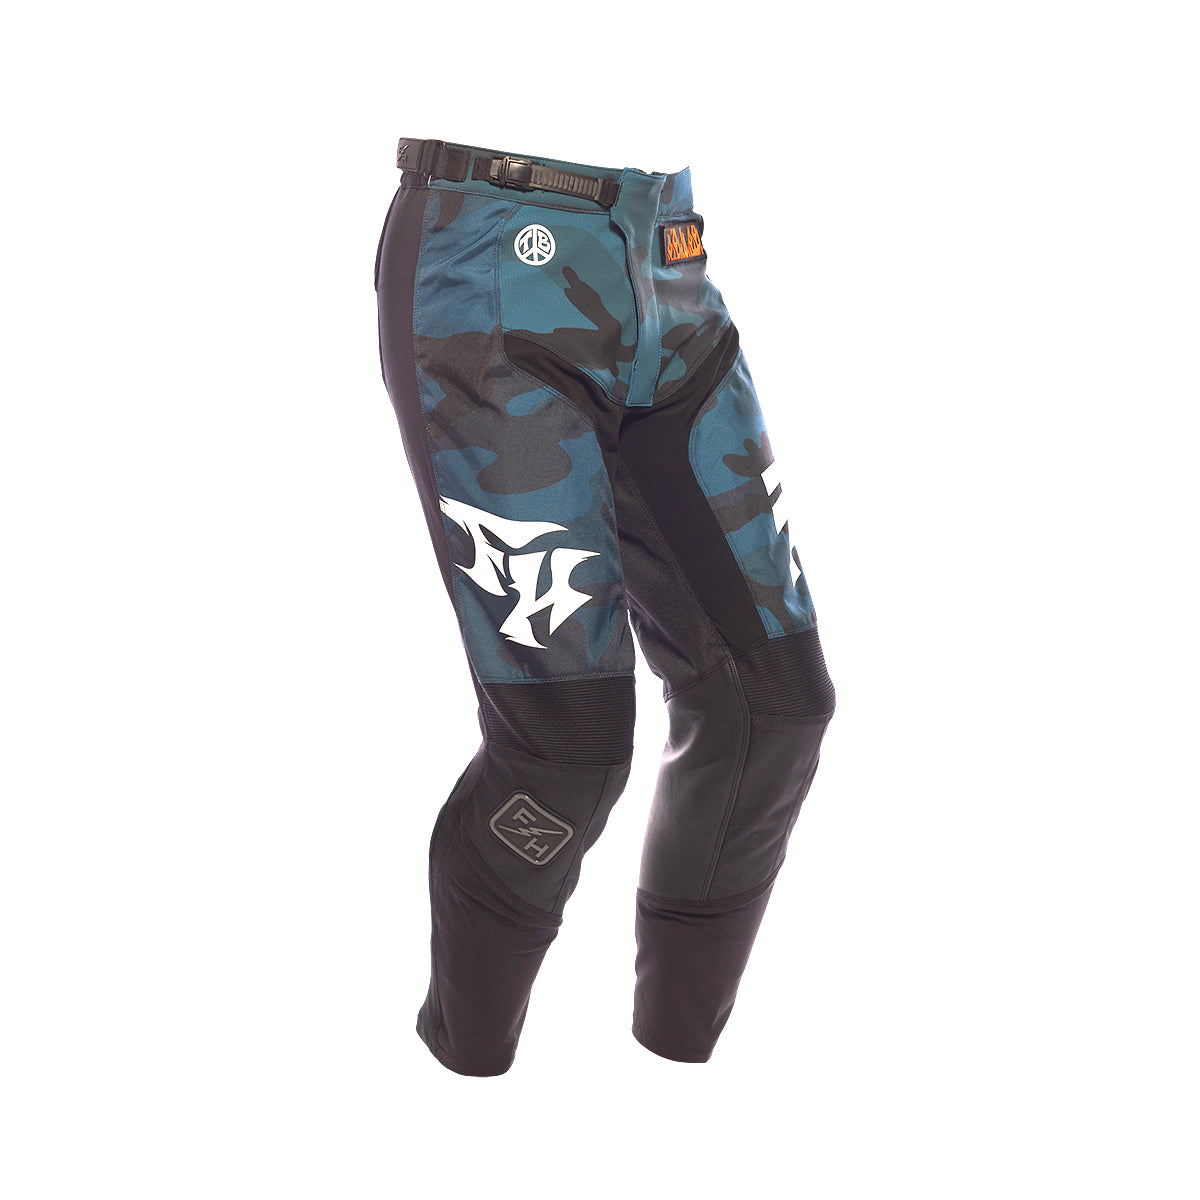 Grindhouse Bereman Youth Pant - Blue Camo